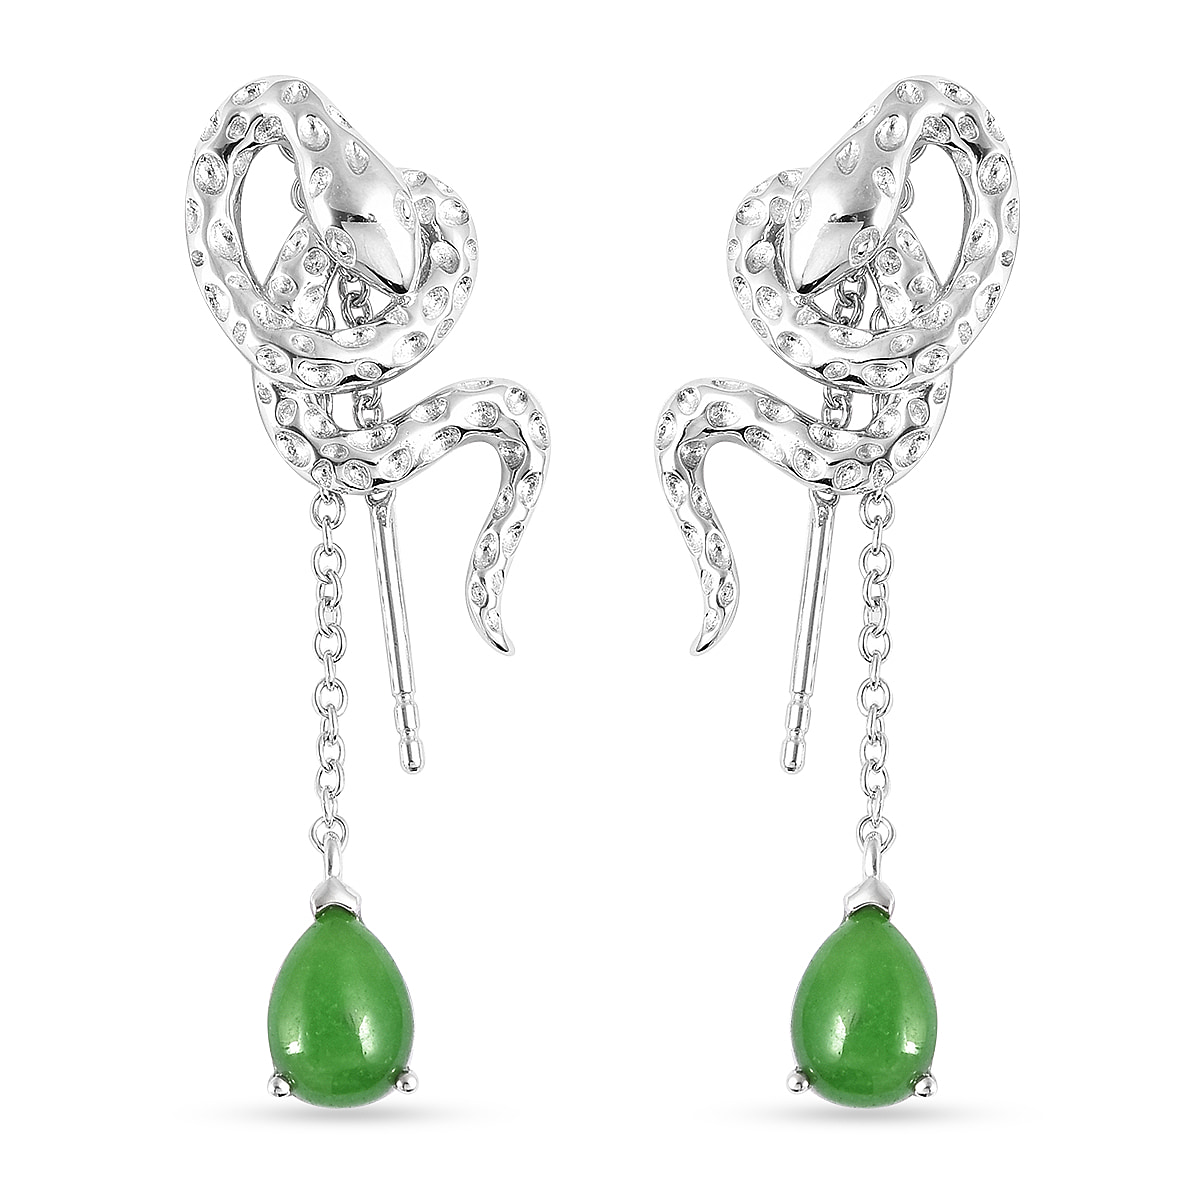 Rachel Galley Venom Collection 2.95 Ct. Green Jade Earrings in Rhodium  Plated Sterling Silver - 3847612 - TJC